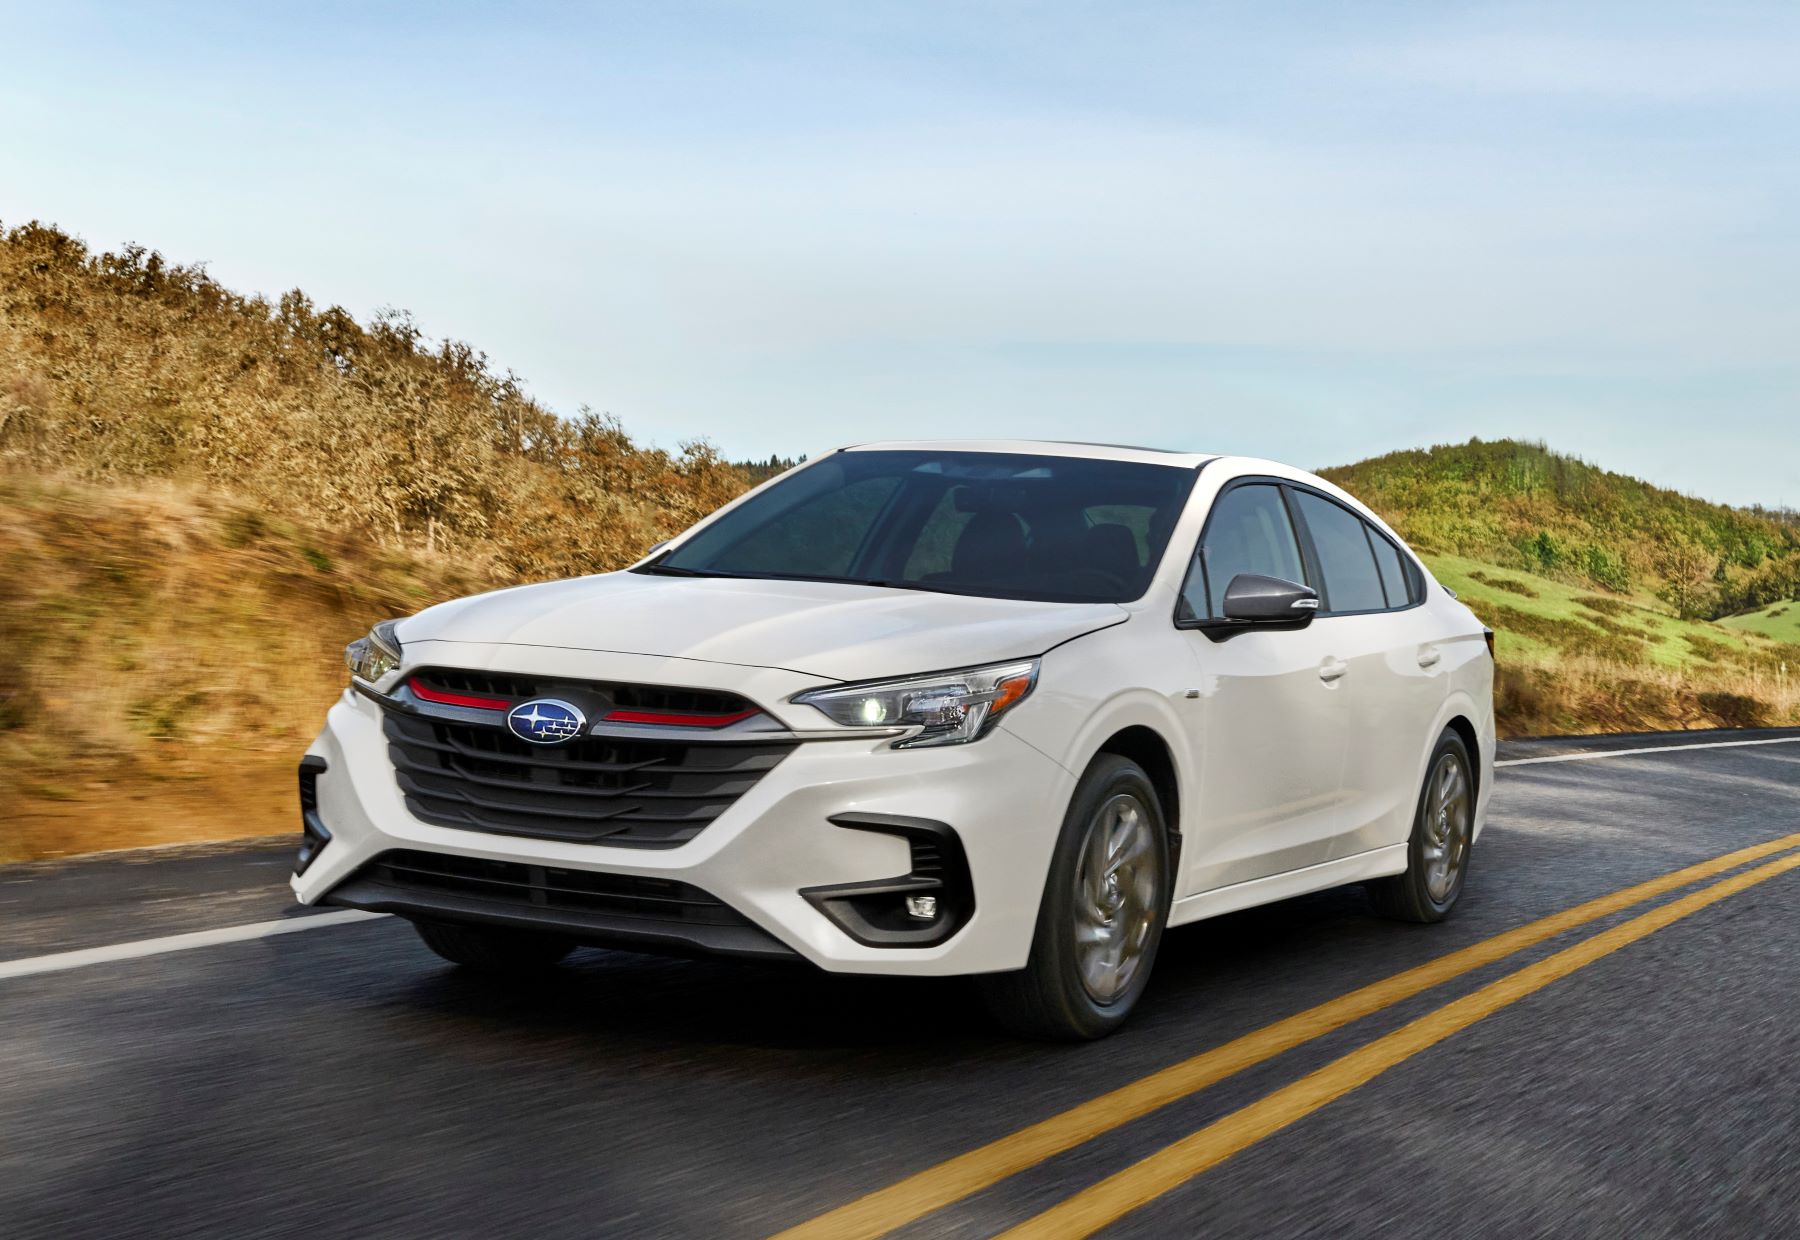 The refreshed white 2023 Subaru Legacy midsize sedan model driving down a country highway near grassy hills